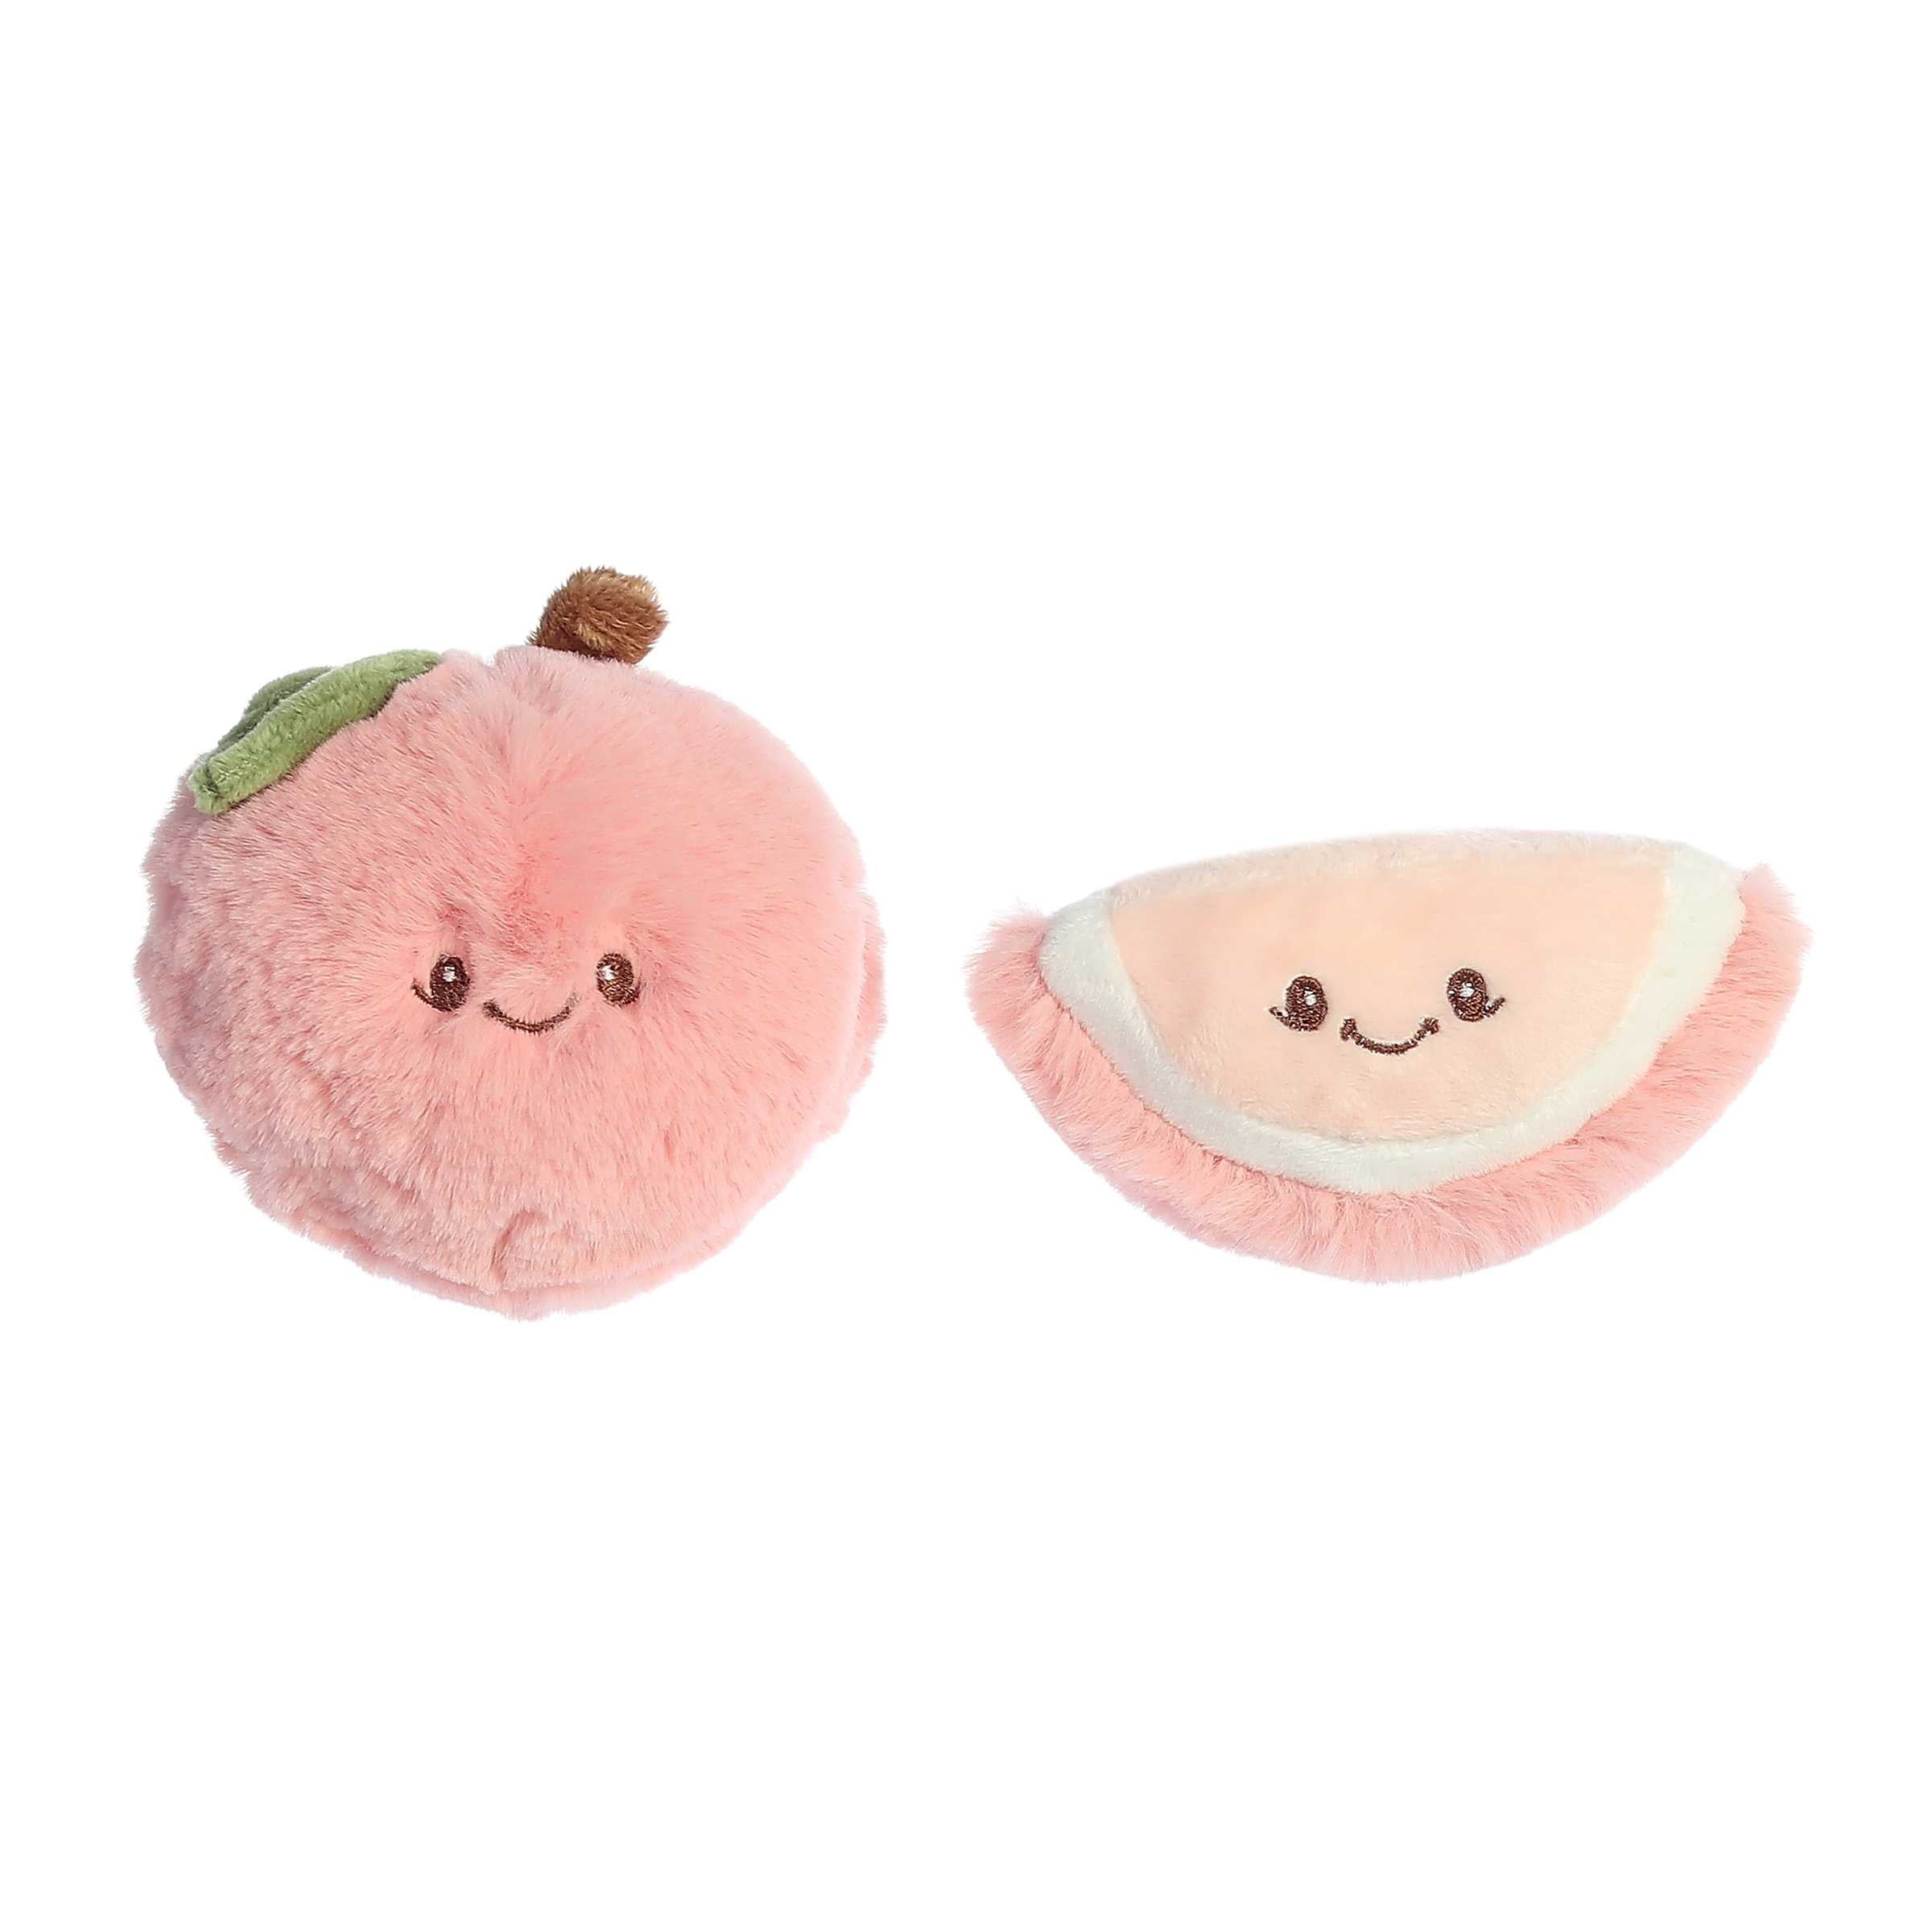 Playful Peach plush toy set with peach rattle and slice crinkle, designed with a smiling face, pink fur, and green leaf